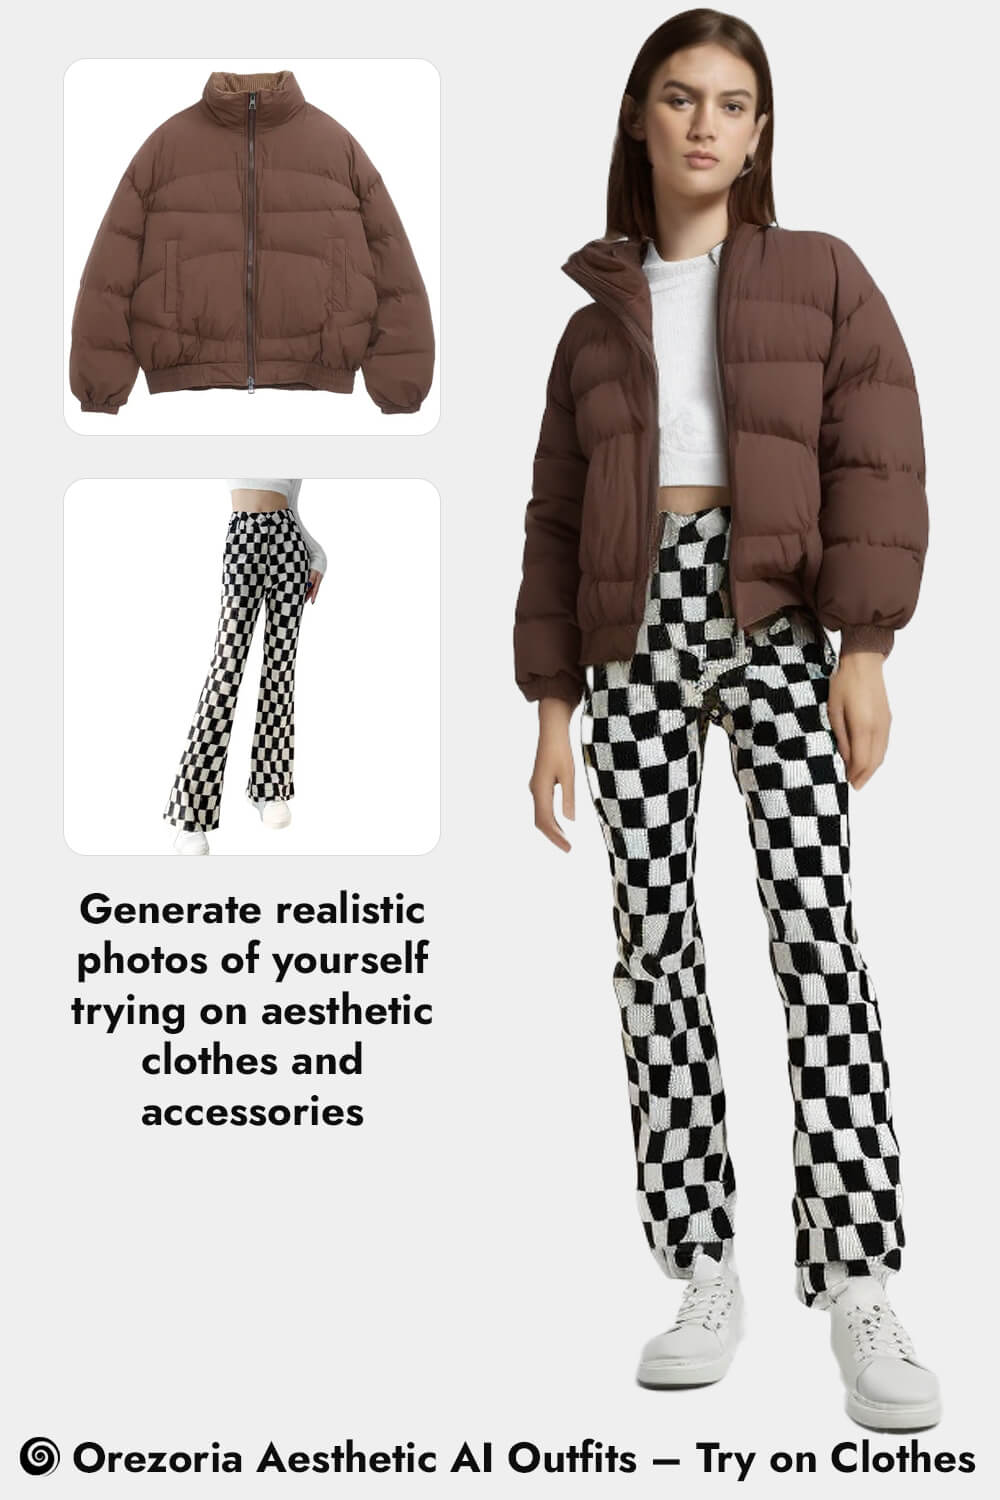 Orezoria Aesthetic AI Outfits – Try on Clothes Warm Puffer Jacket for Women Stand Collar Gorpcore Aesthetic Black and White Checkered Pants for Women Alternative Style